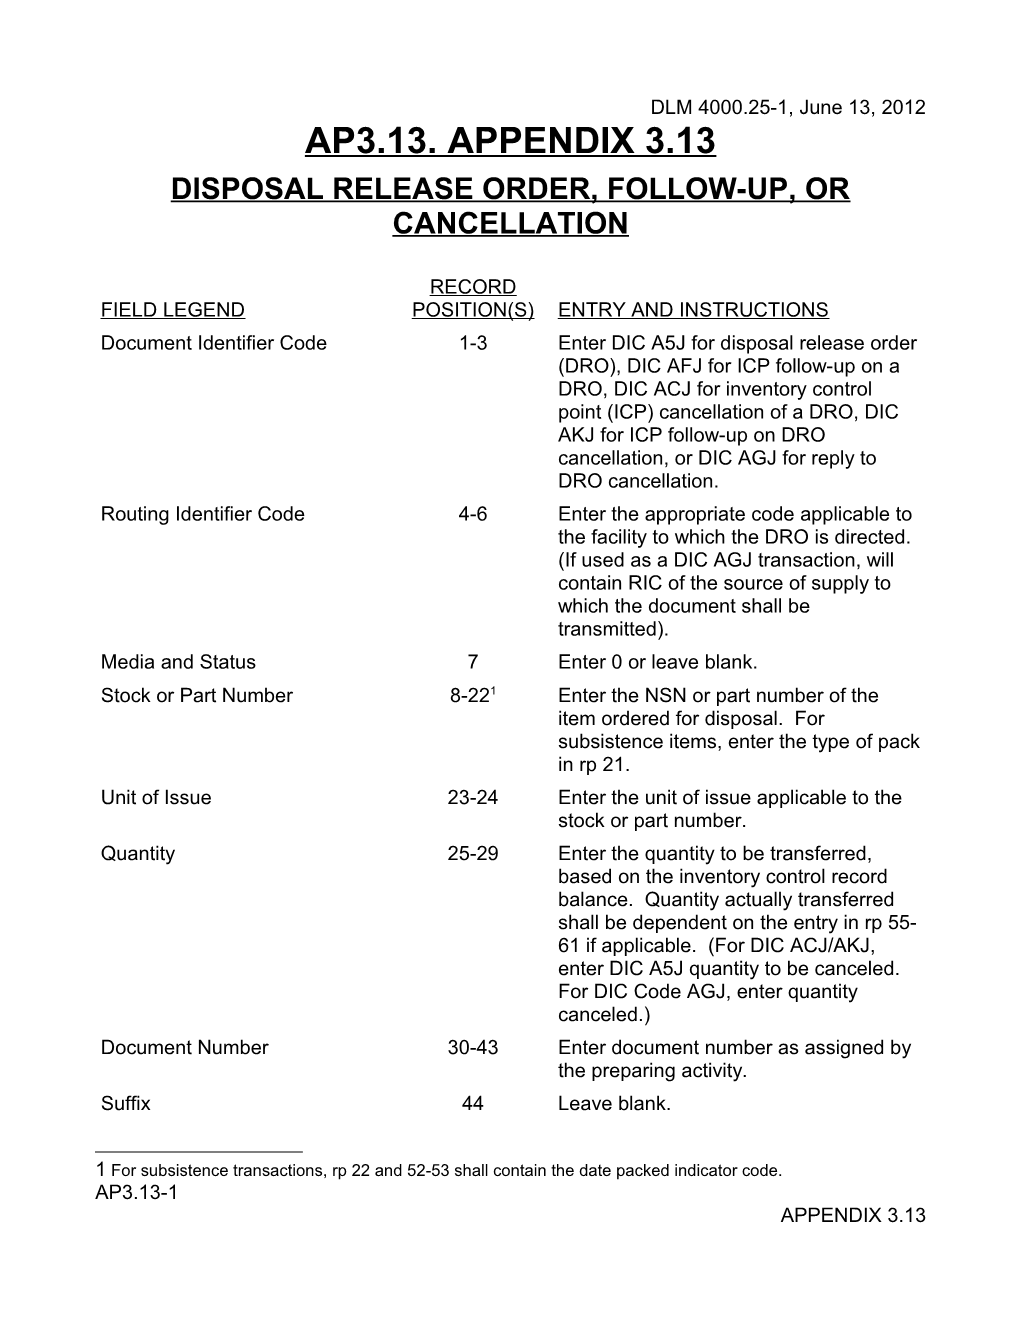 Appendix 3.13 - Disposal Release Order, Follow-Up, Or Cancellation